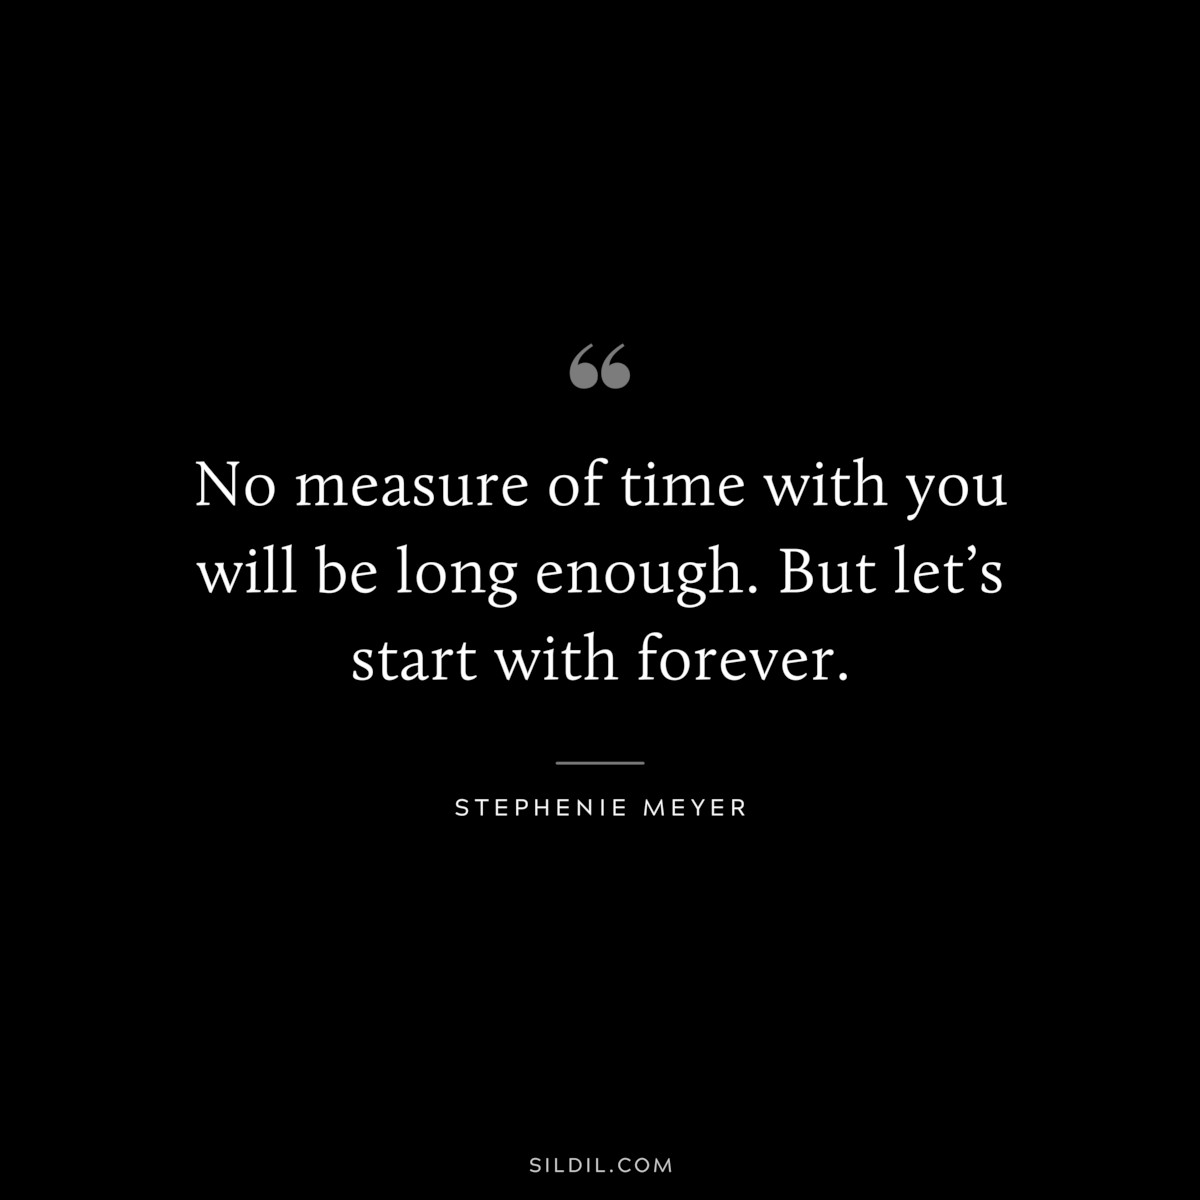 No measure of time with you will be long enough. But let’s start with forever. ― Stephenie Meyer